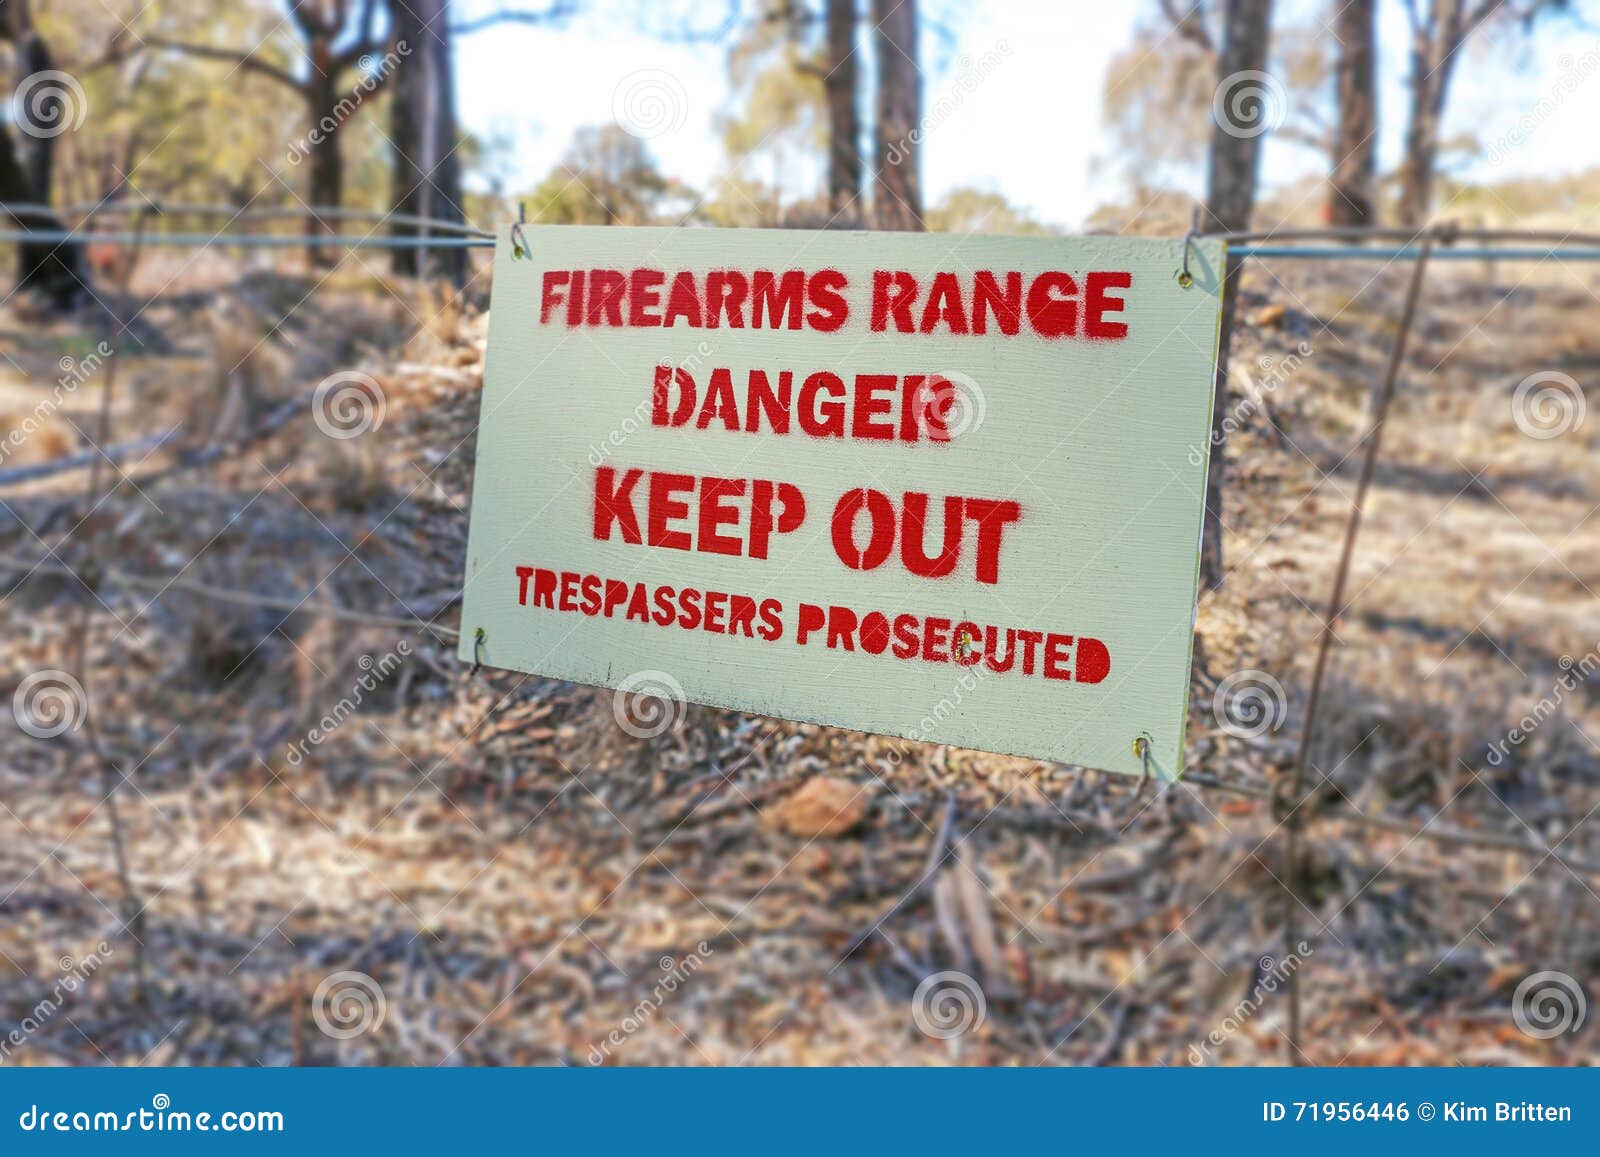 danger firearms range keep out trespassers prosecuted sign on fence